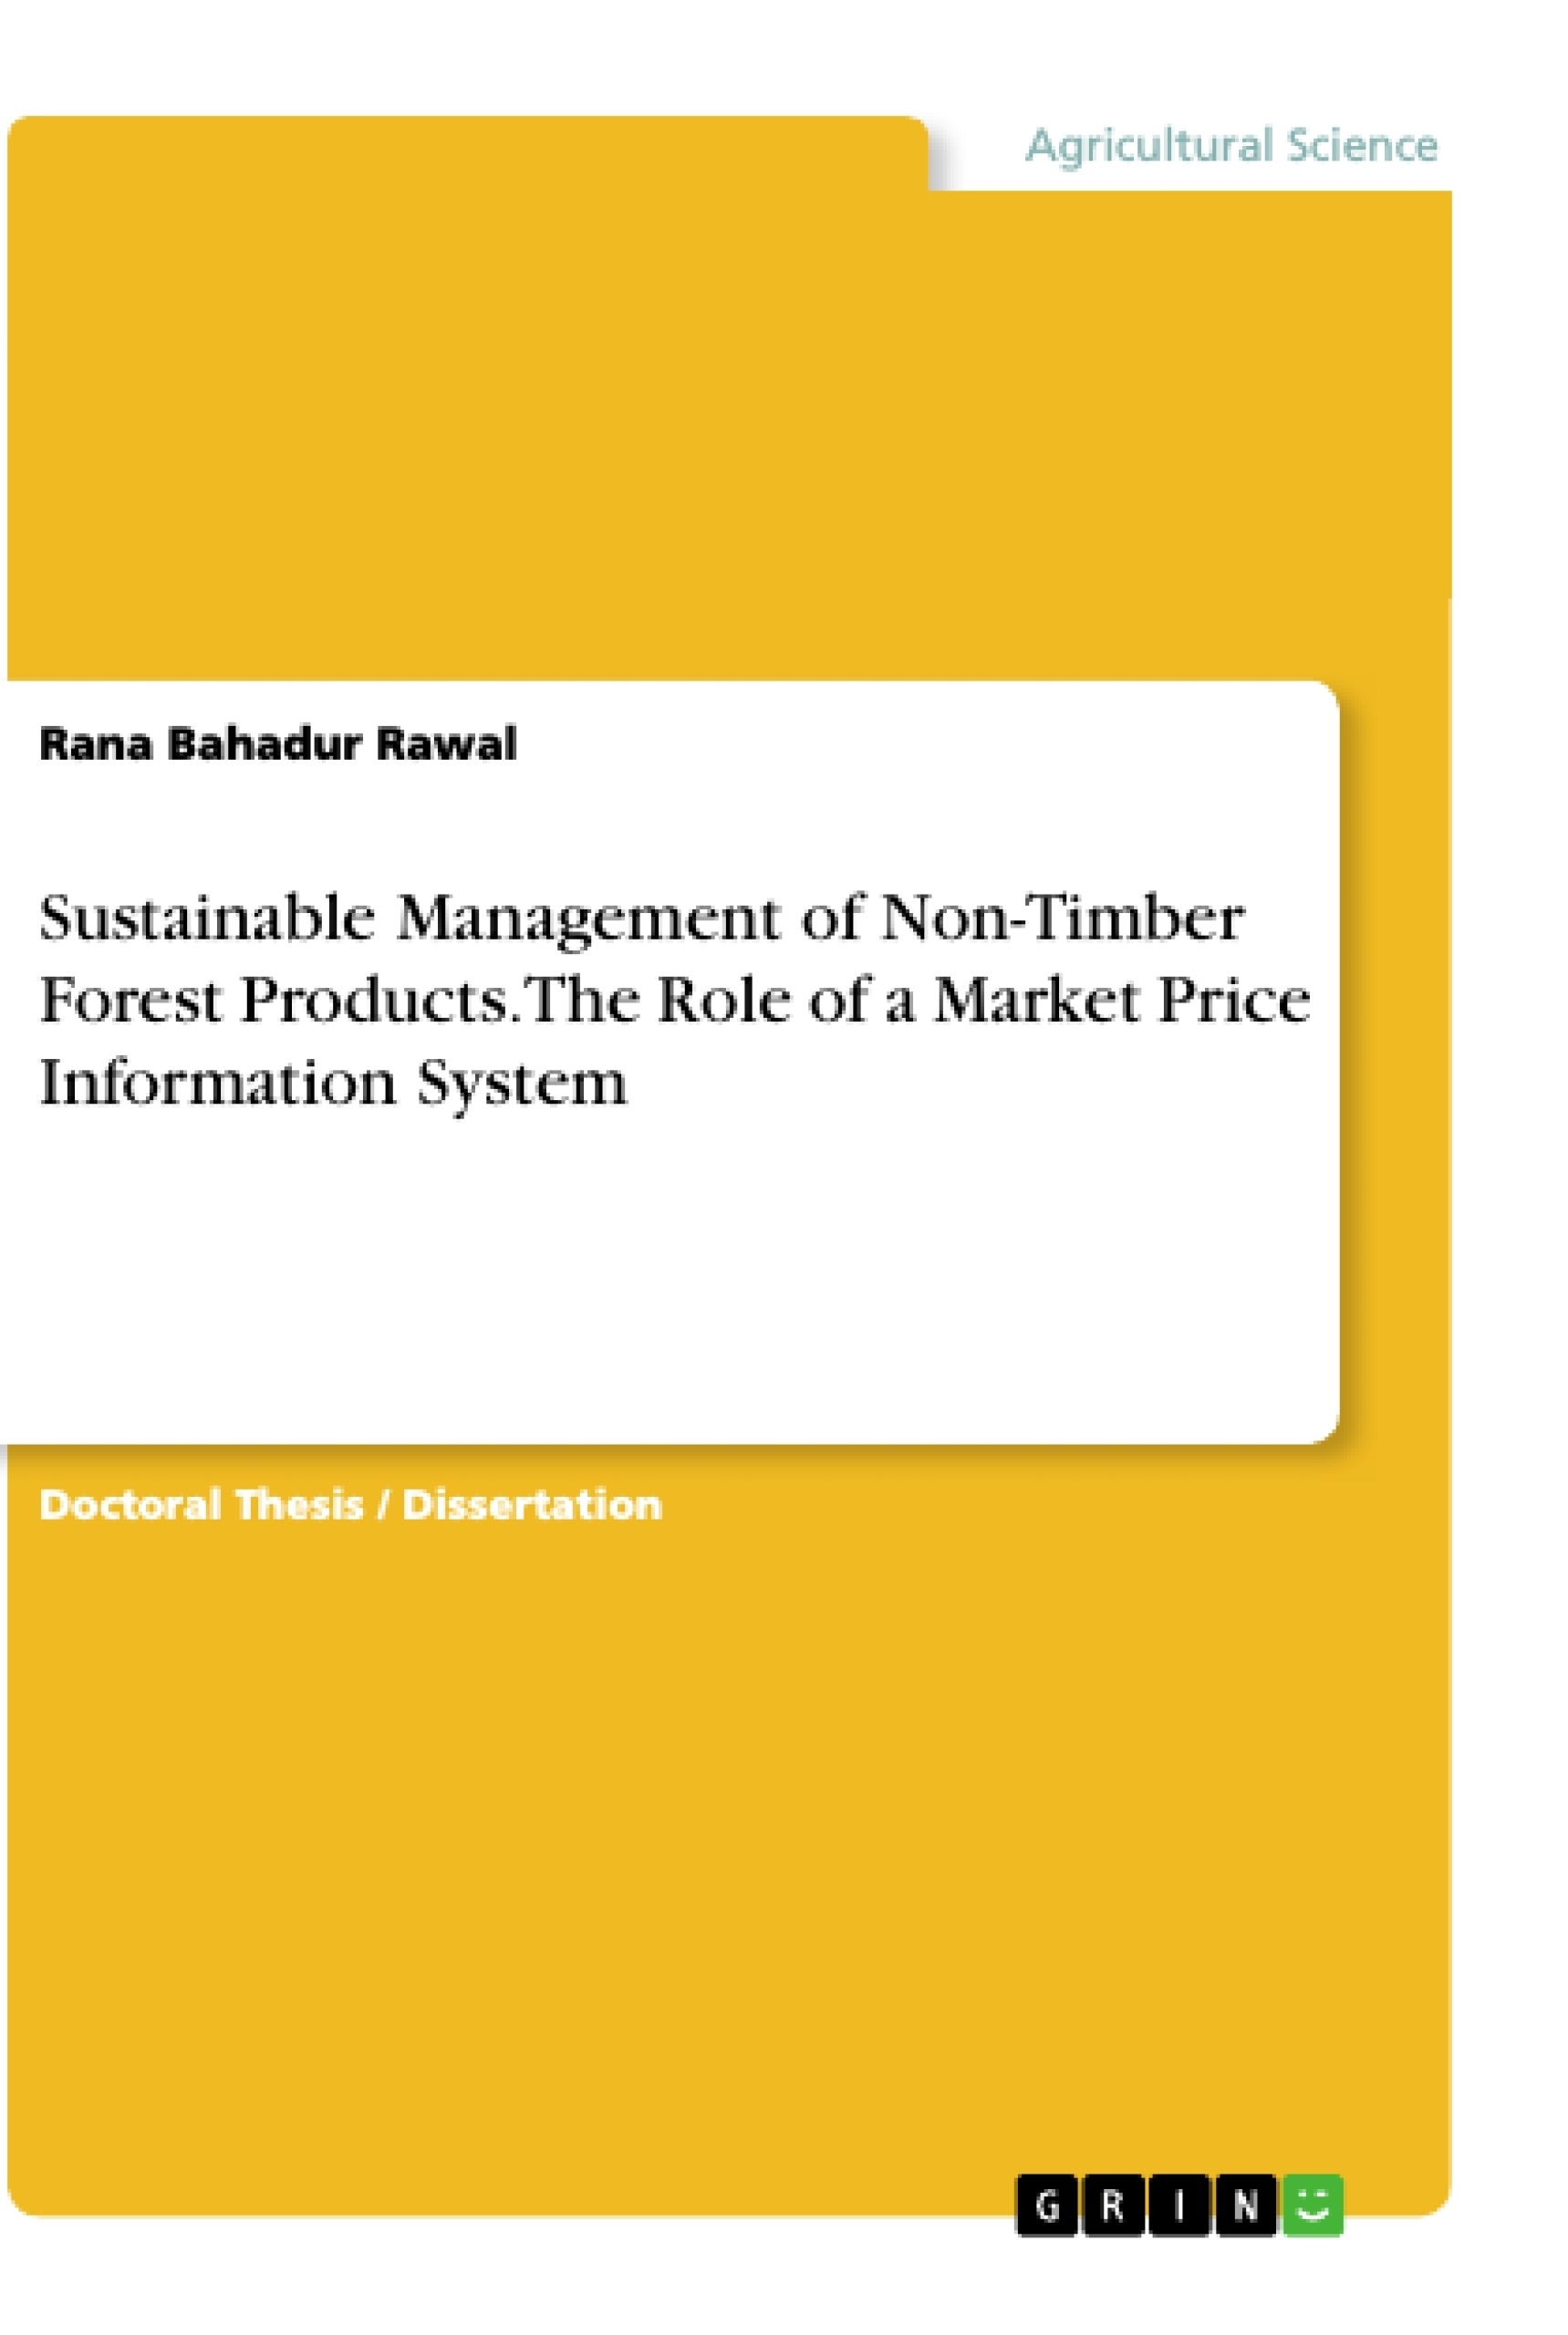 Title: Sustainable Management of Non-Timber Forest Products. The Role of a Market Price Information System